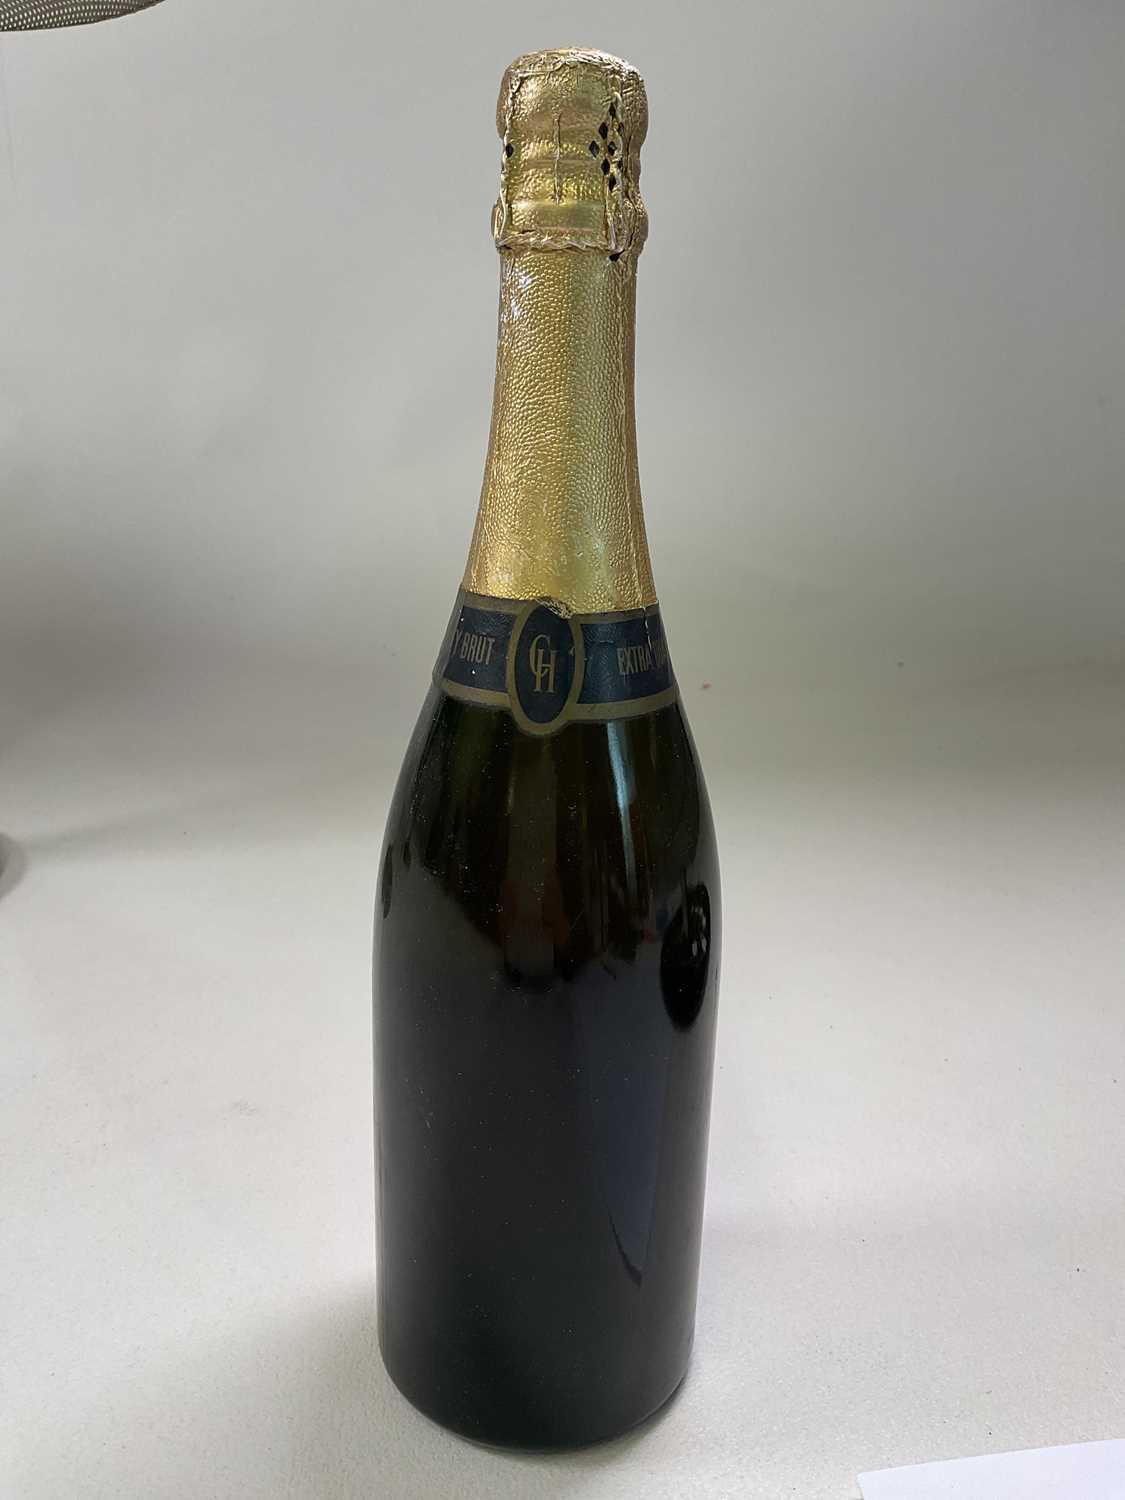 CHAMPAGNE; a bottle of Charles Heidsieck Champagne brut, circa 1973 - Image 2 of 2